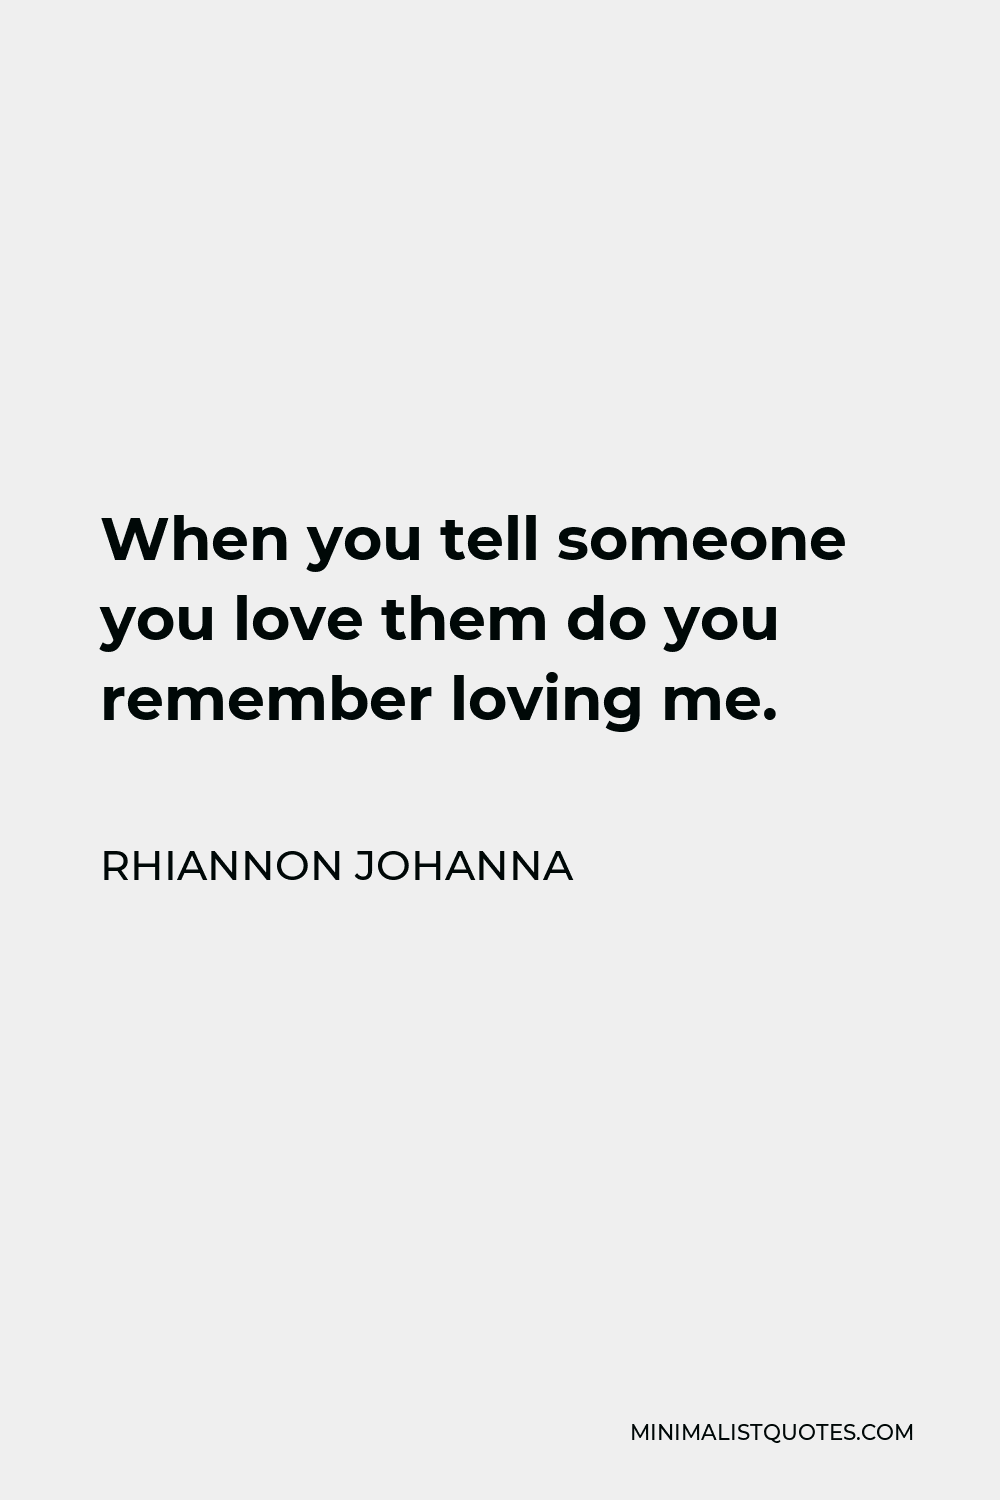 Rhiannon Johanna Quote - When you tell someone you love them do you remember loving me.